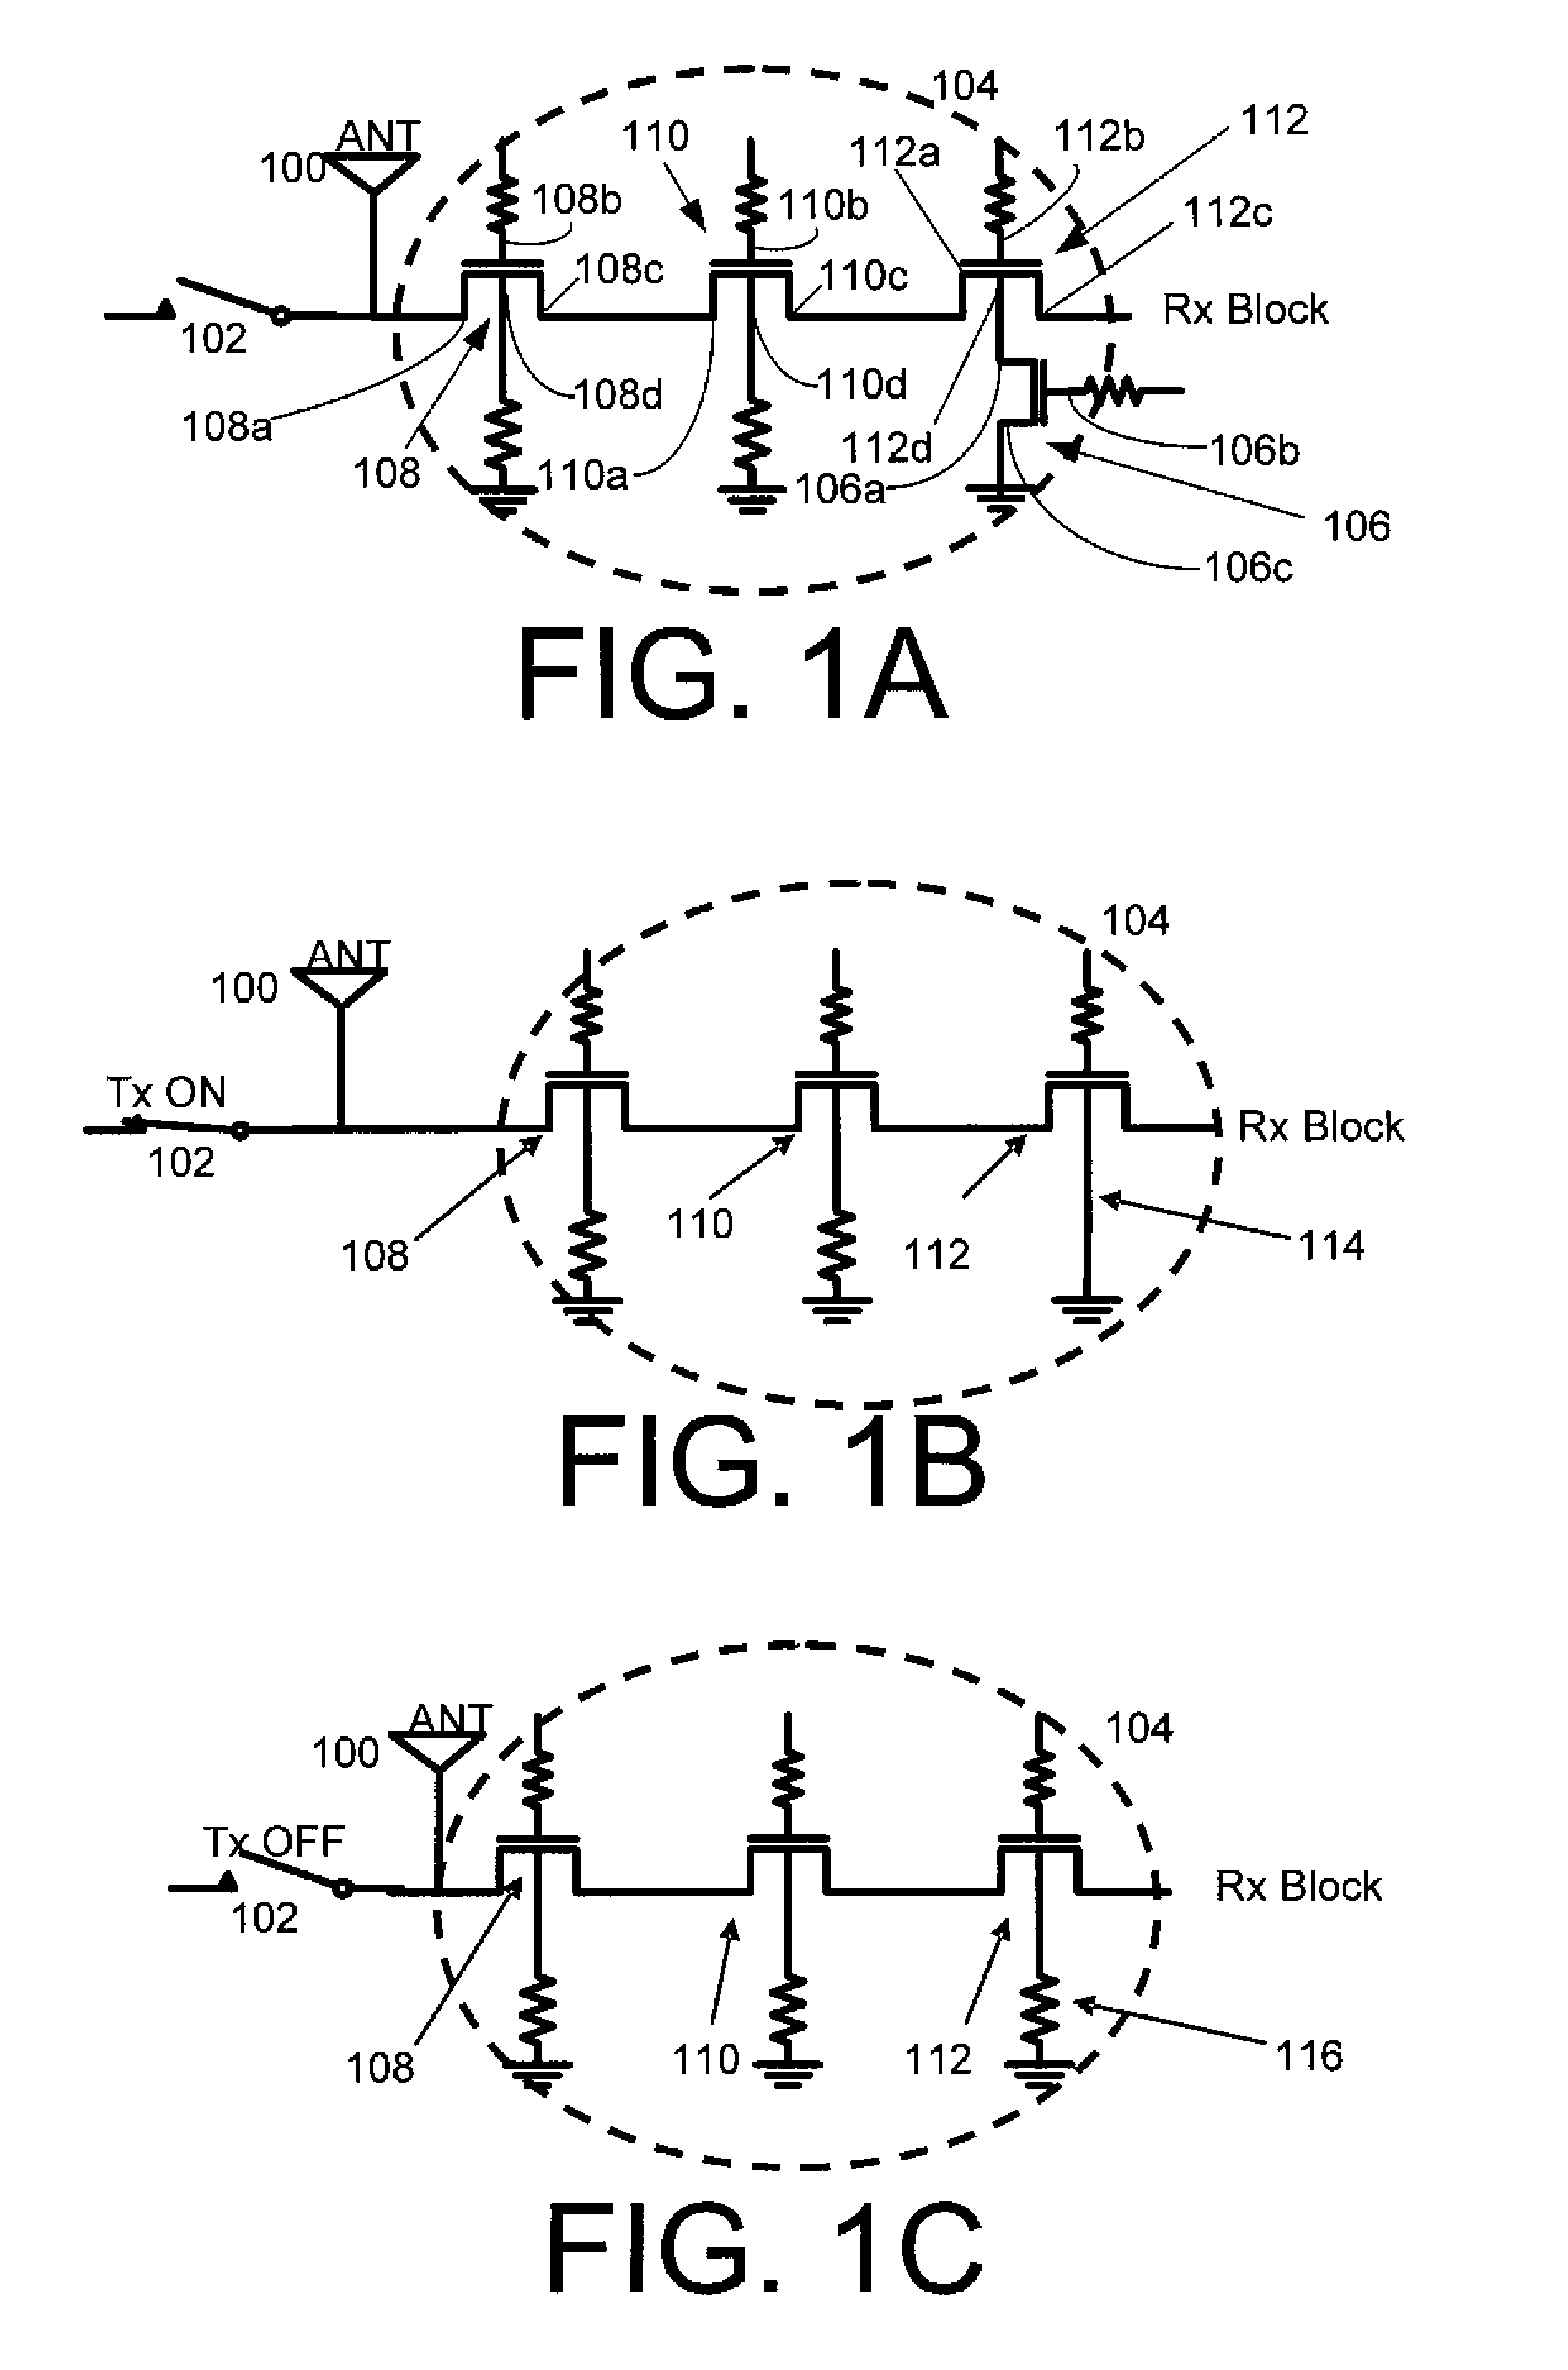 Systems, Methods, and Apparatuses for High Power Complementary Metal Oxide Semiconductor (CMOS) Antenna Switches Using Body Switching and Substrate Junction Diode Controlling in Multistacking Structure